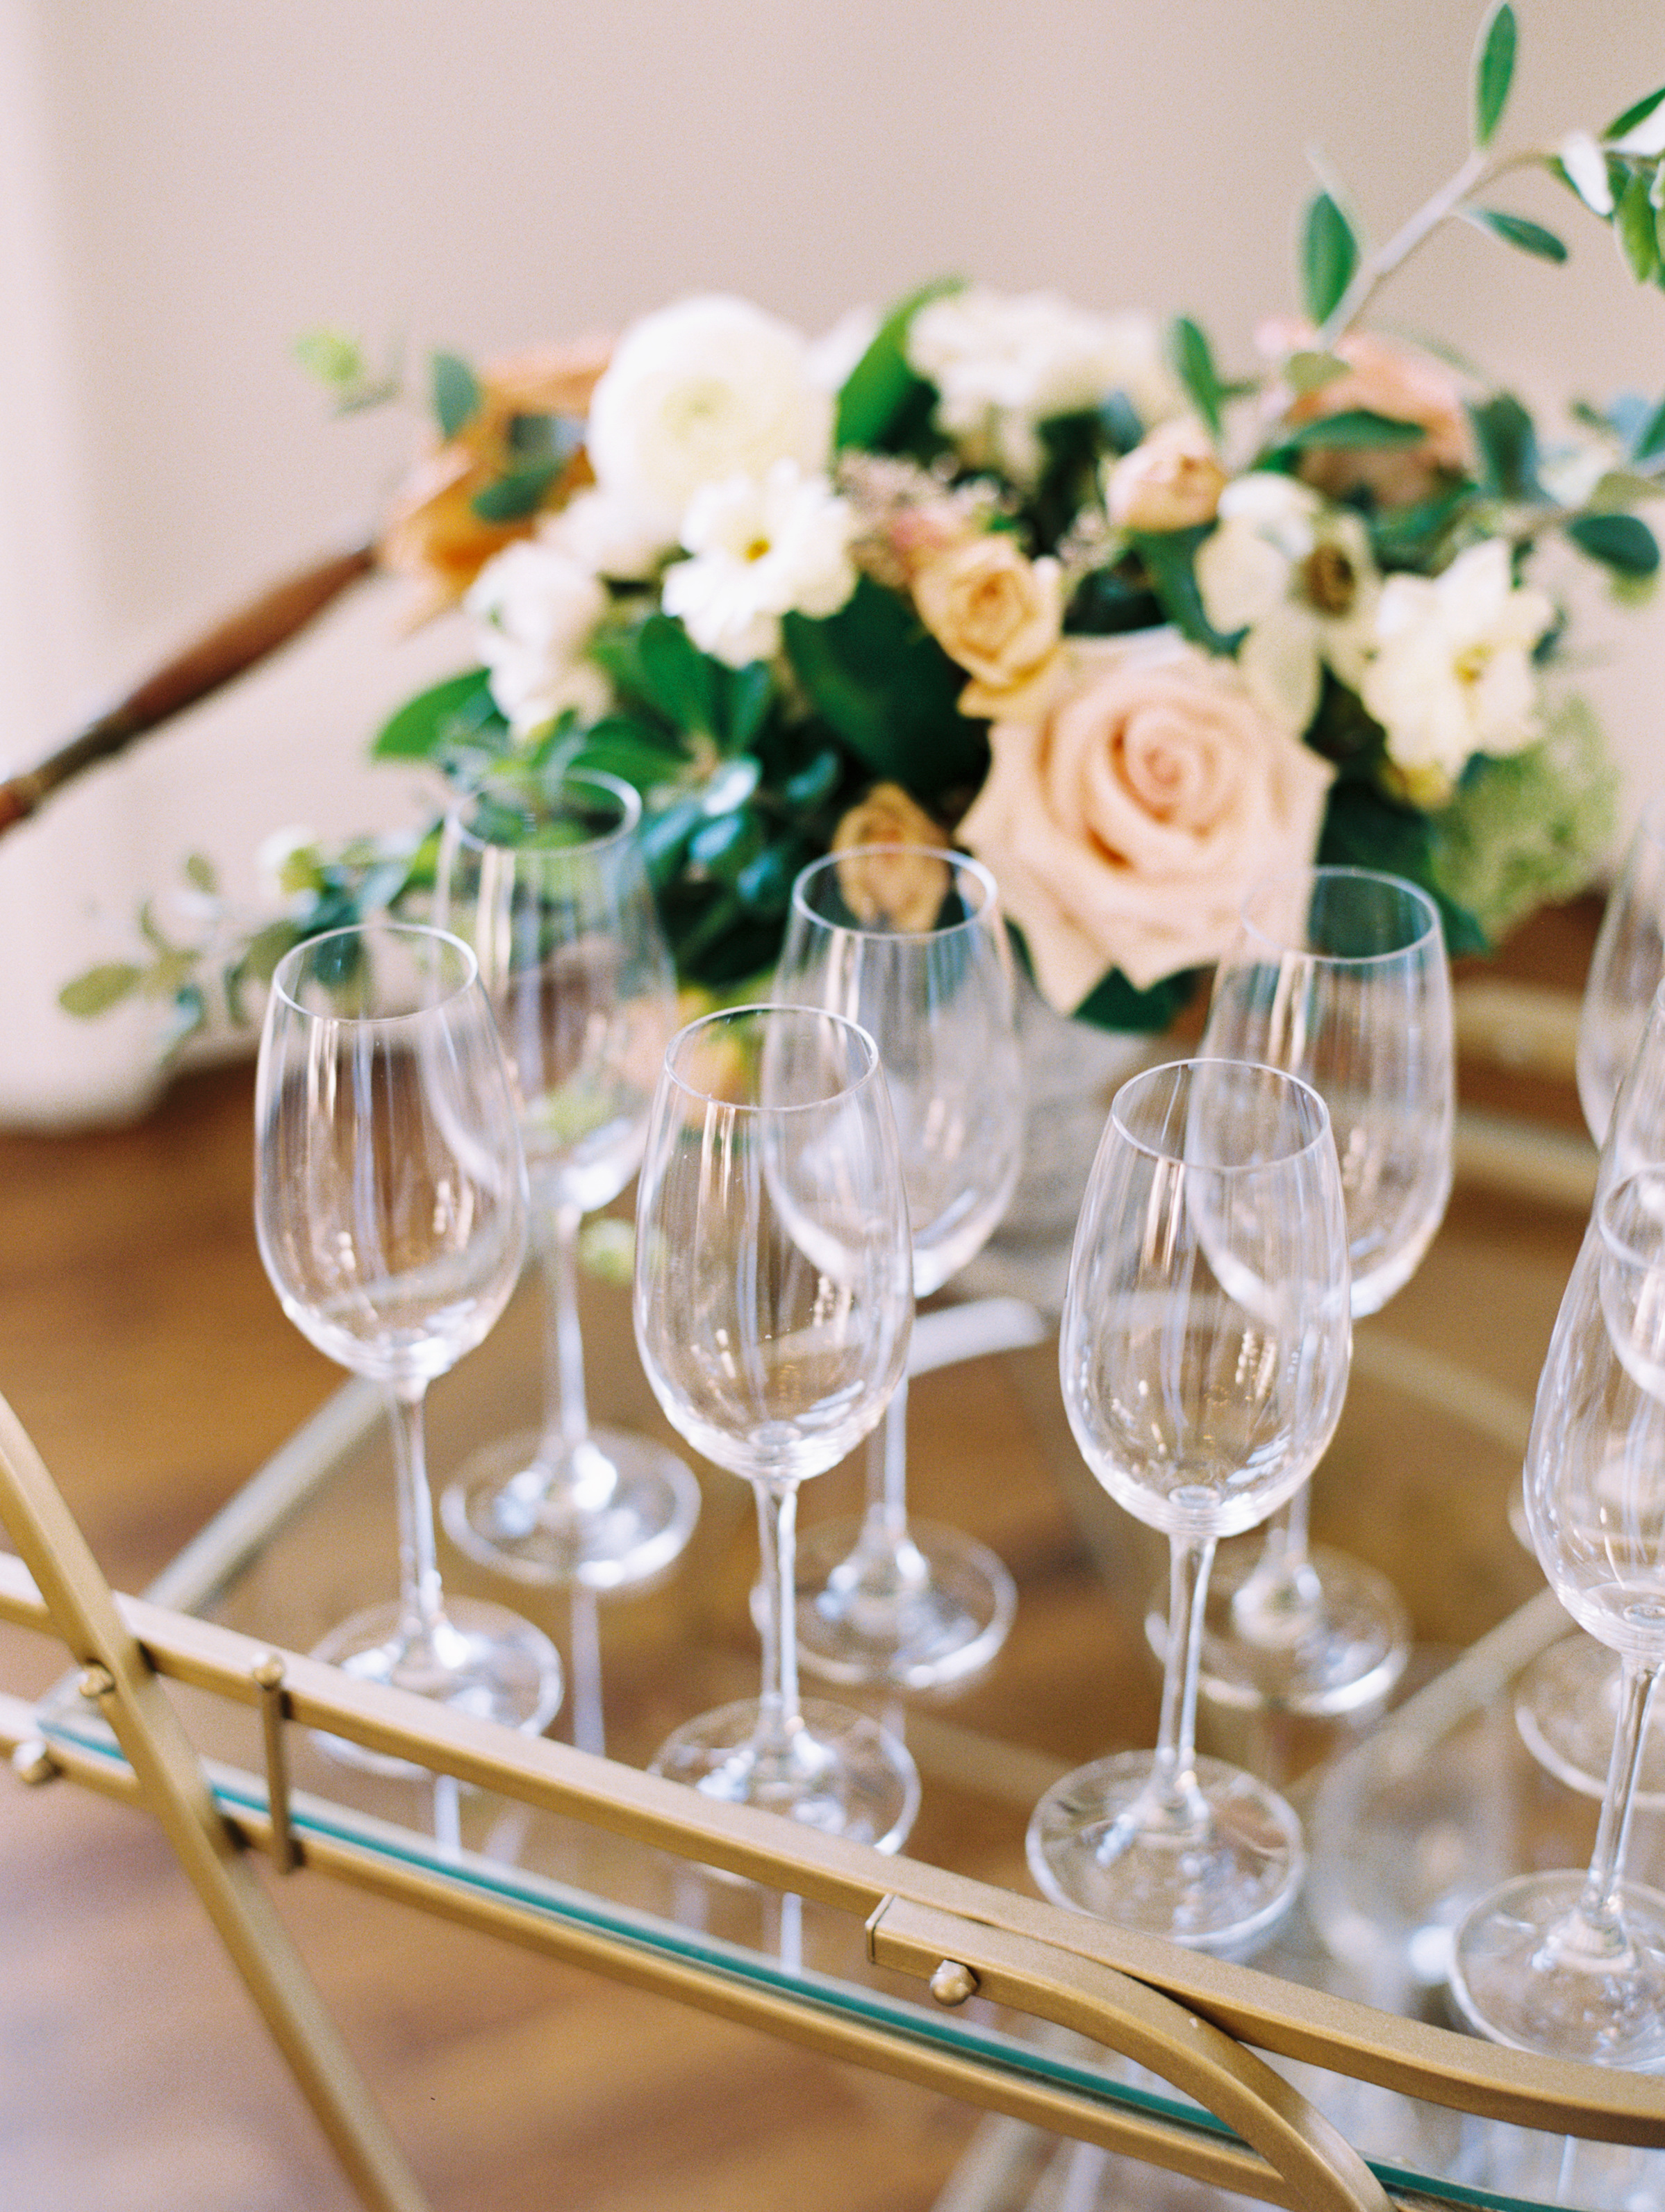 Glassware on bar cart for mimosa bar | Historic wedding and event venue: McAlister-Leftwich House in Greensboro, NC